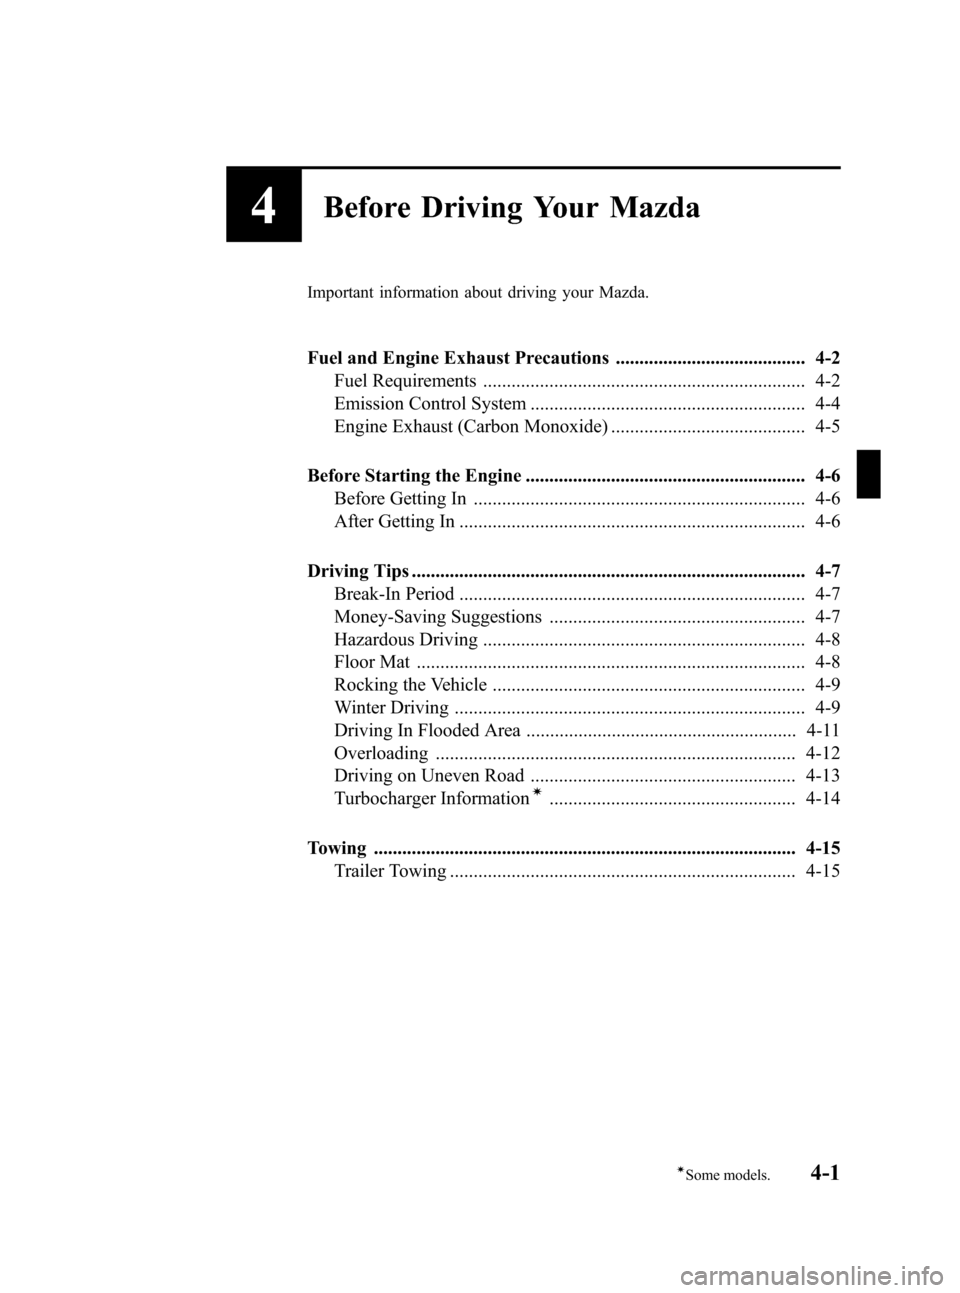 MAZDA MODEL 3 HATCHBACK 2012  Owners Manual (in English) Black plate (147,1)
4Before Driving Your Mazda
Important information about driving your Mazda.
Fuel and Engine Exhaust Precautions ........................................ 4-2Fuel Requirements .......